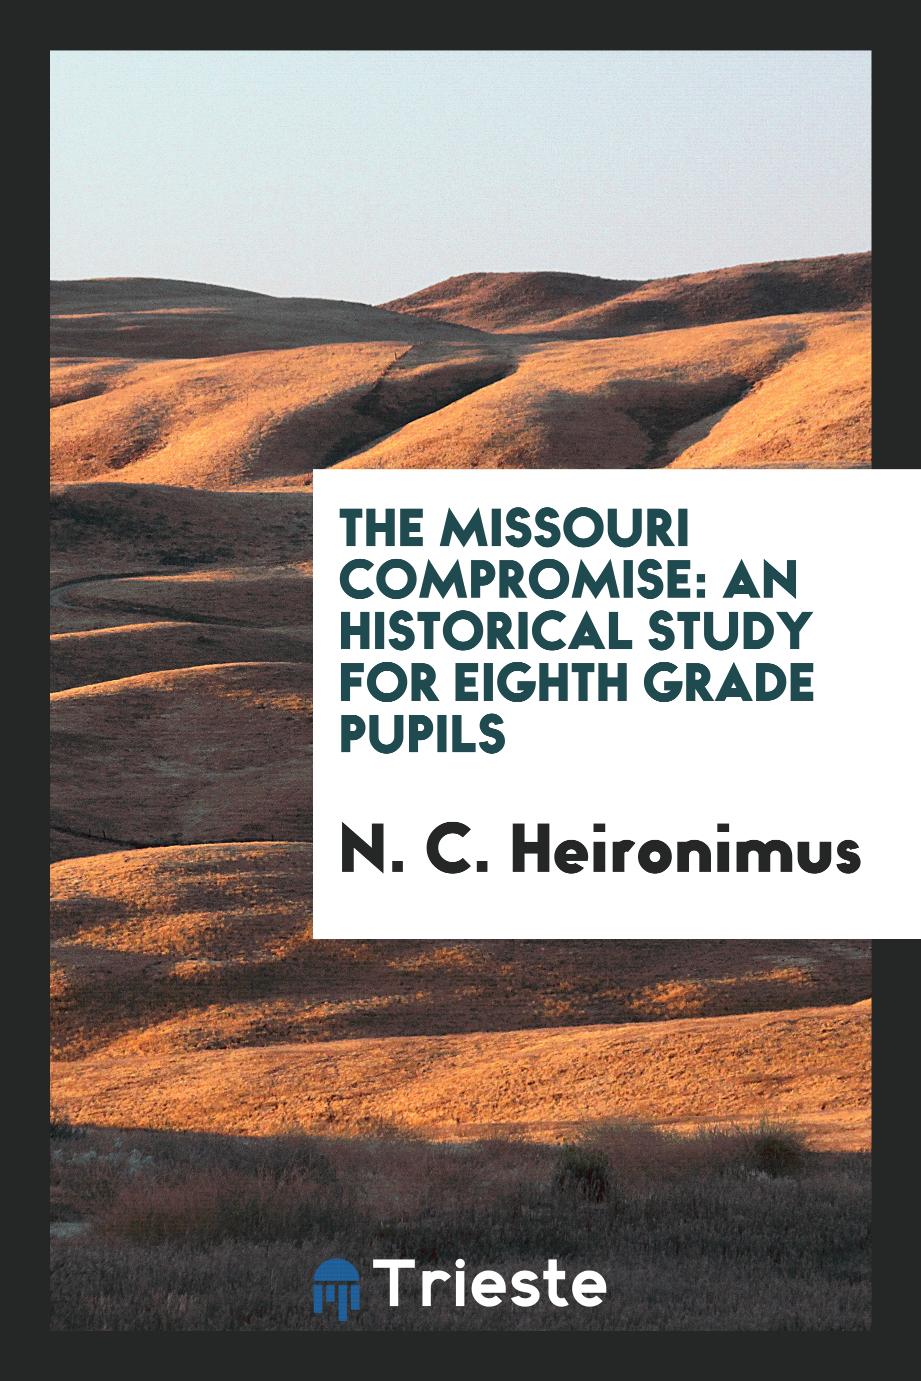 The Missouri Compromise: An Historical Study for Eighth Grade Pupils